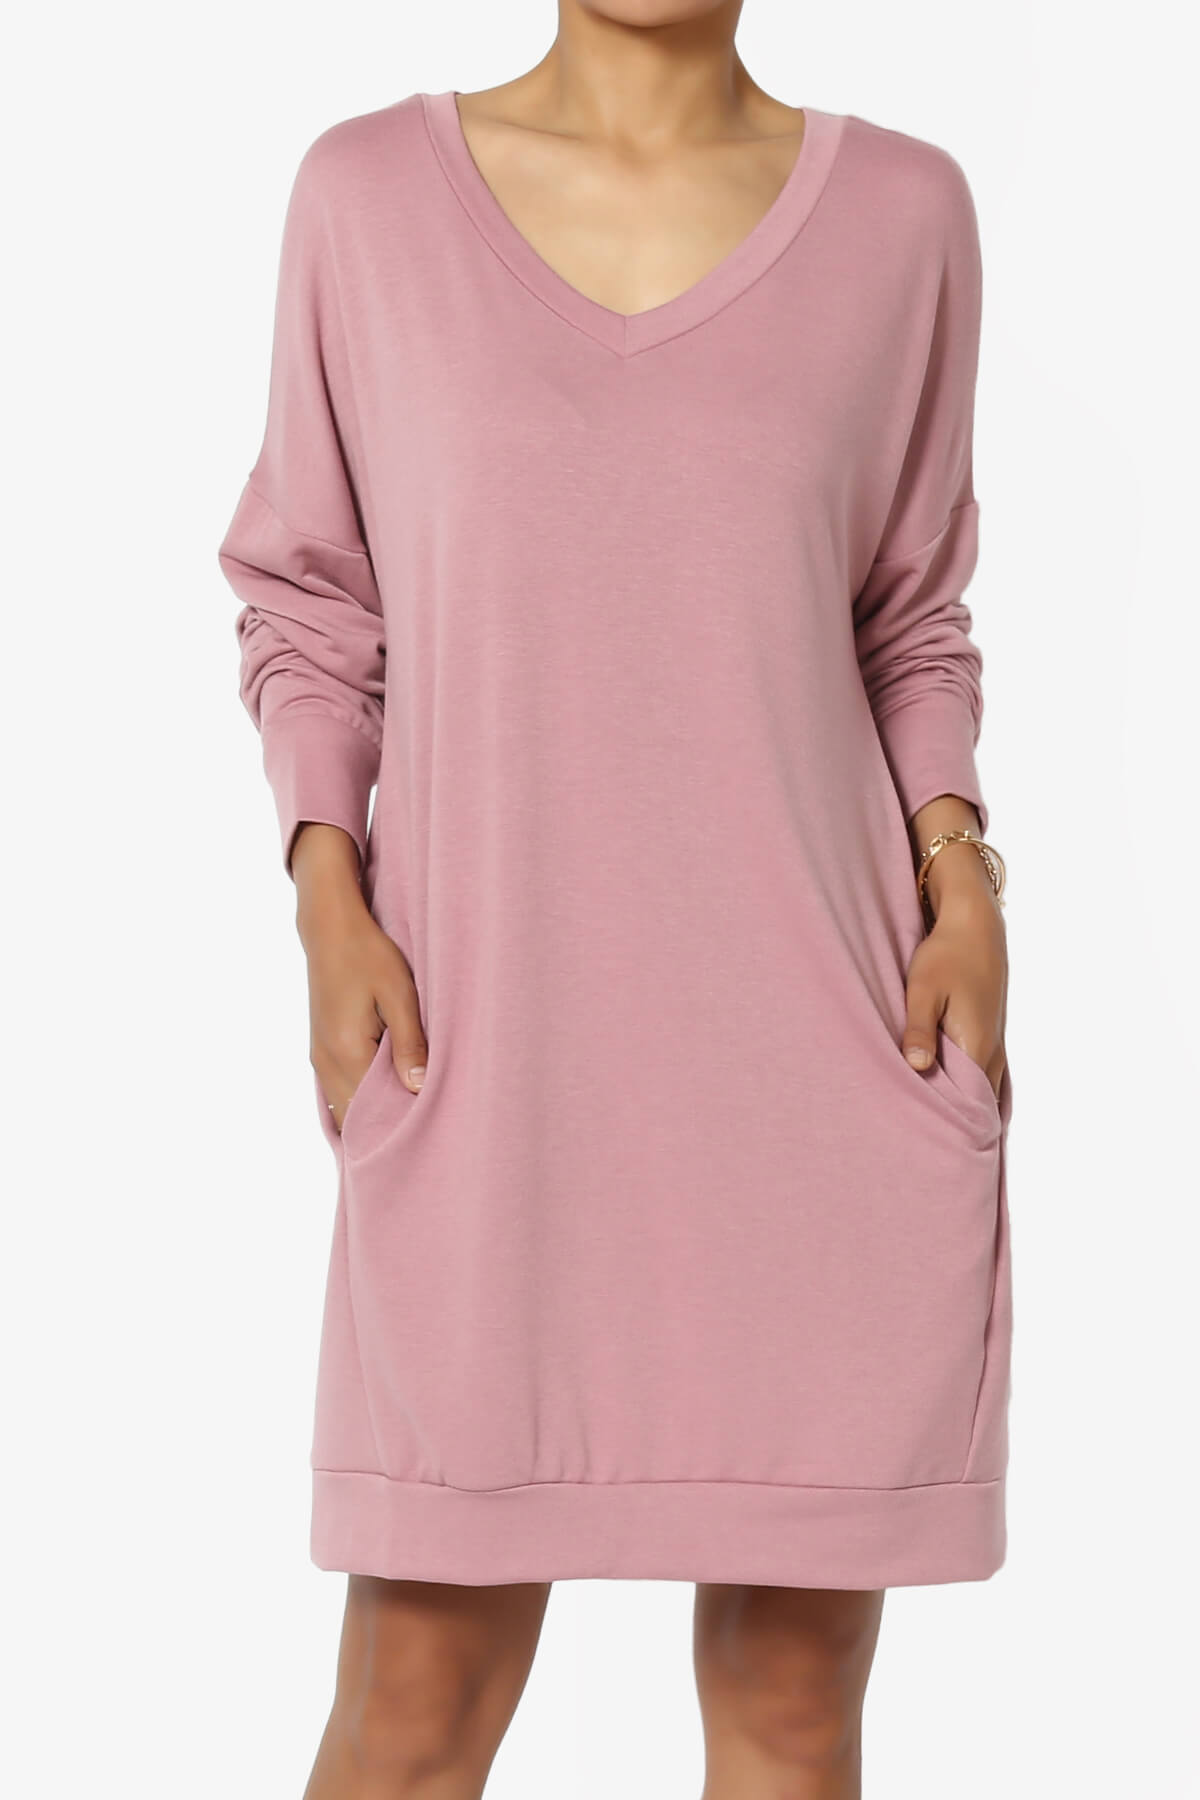 Load image into Gallery viewer, Chrissy V-Neck Pocket Soft Terry Tunic LIGHT ROSE_1
